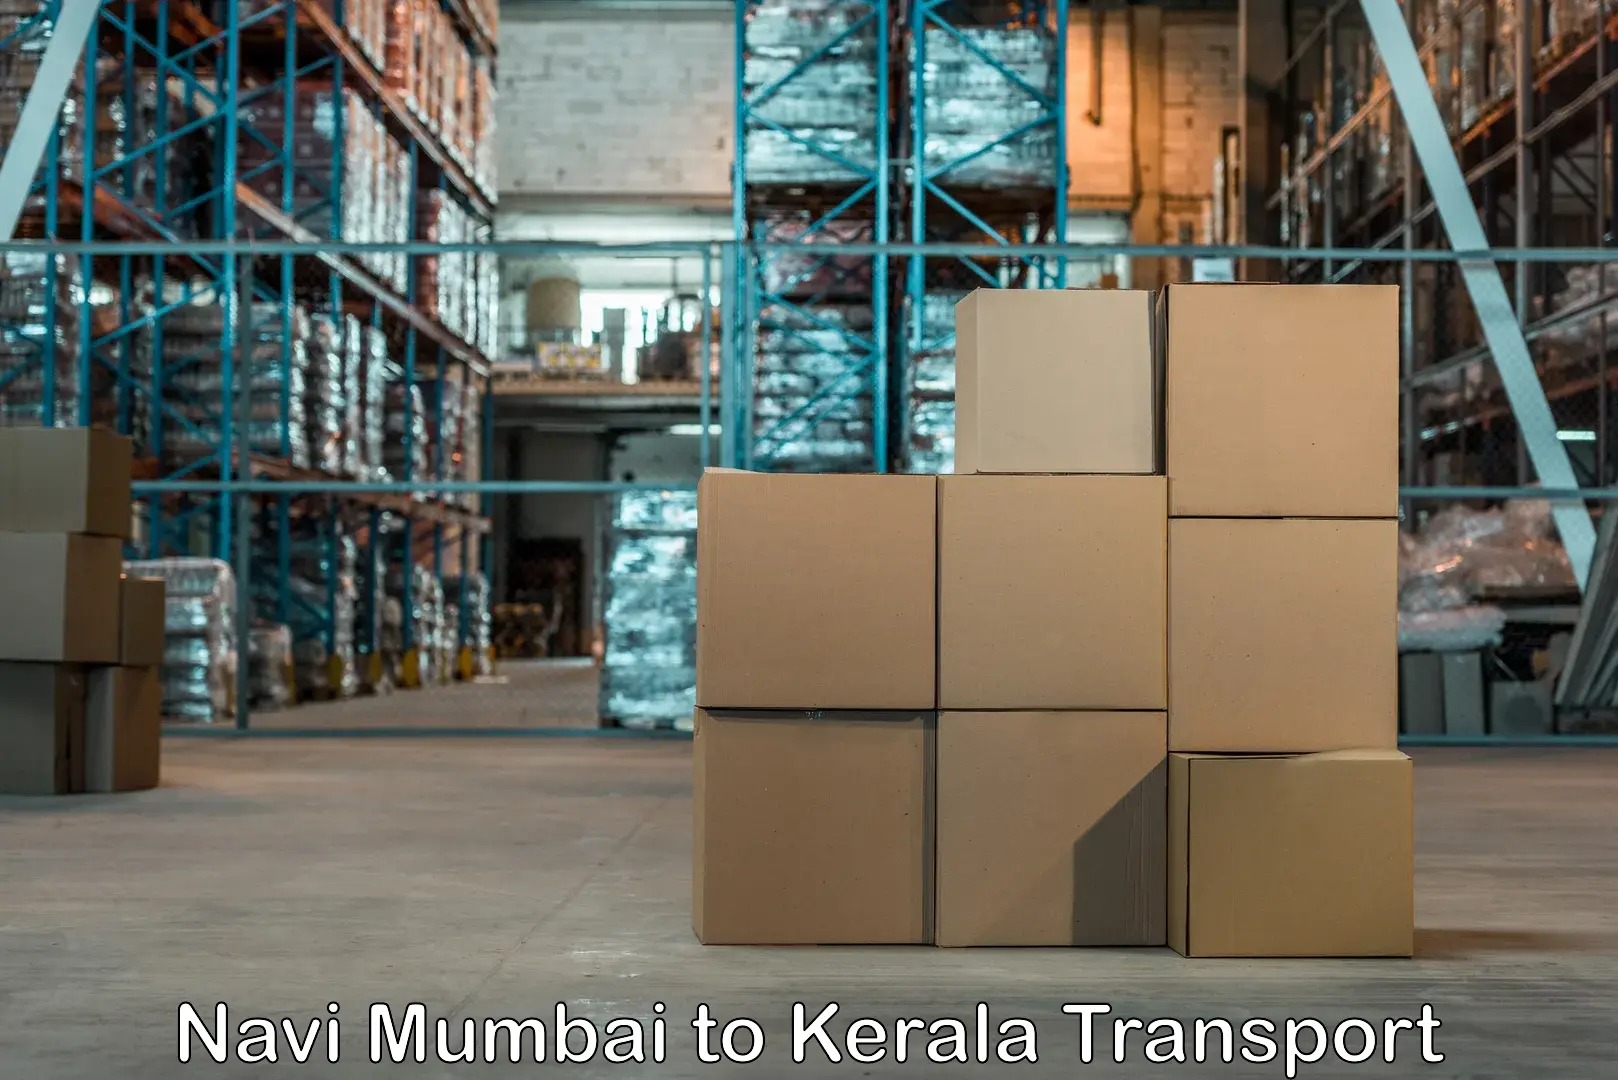 Truck transport companies in India Navi Mumbai to Cochin University of Science and Technology